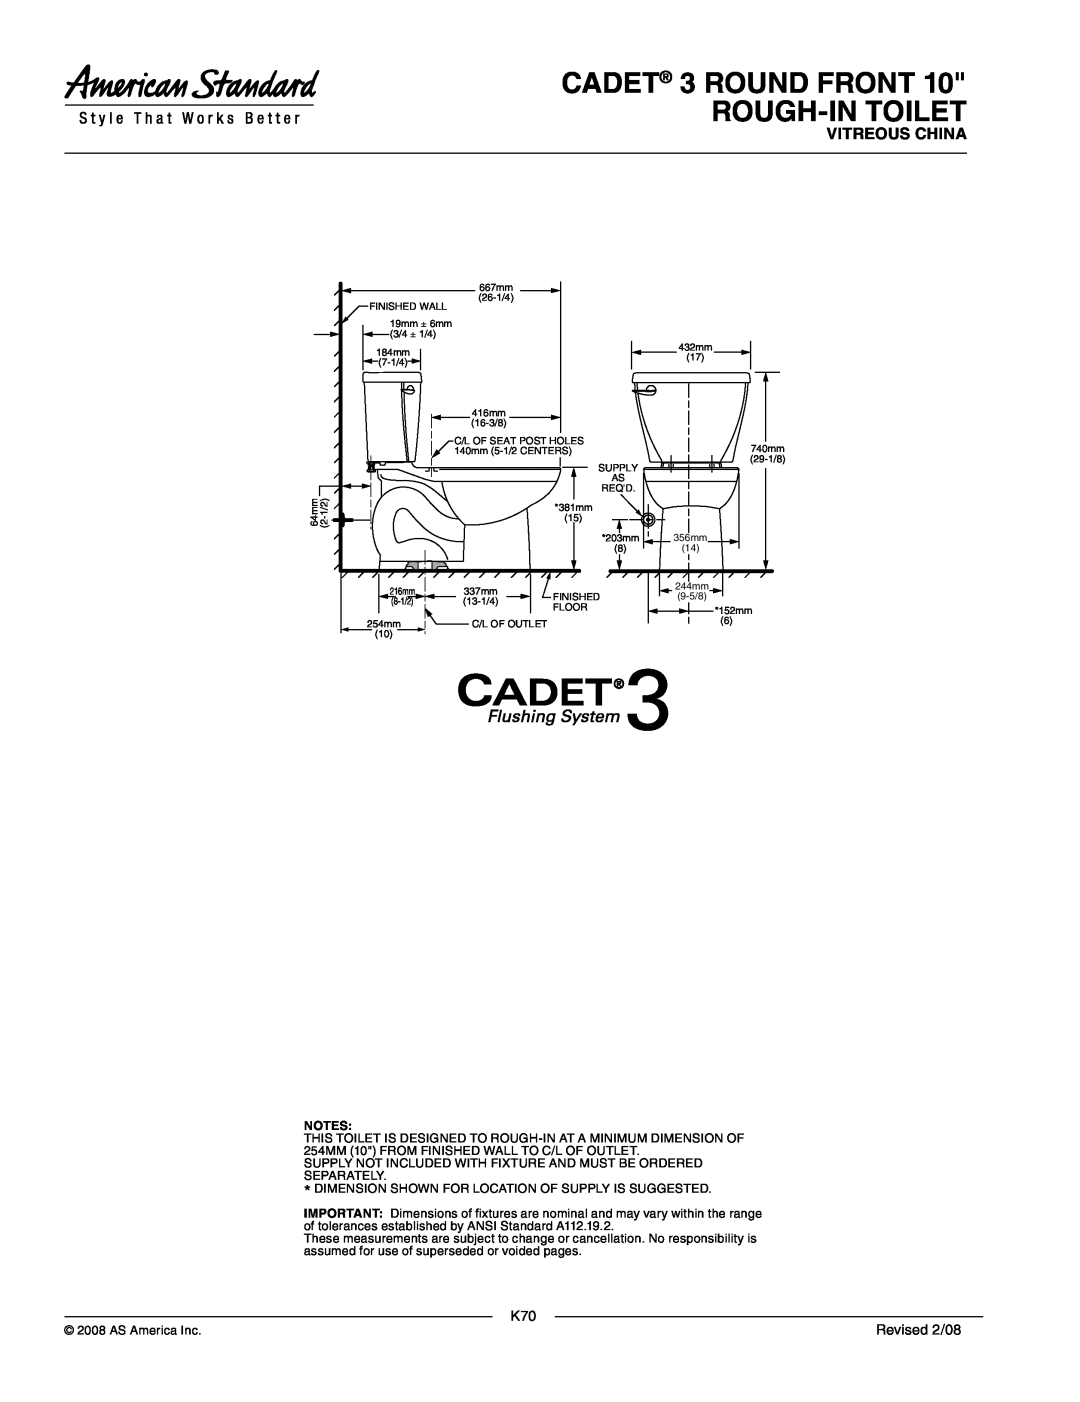 American Standard 4019.900, 4019.600, 4019.800, 2384.010 CADET 3 ROUND FRONT ROUGH-INTOILET, Vitreous China, Revised 2/08 